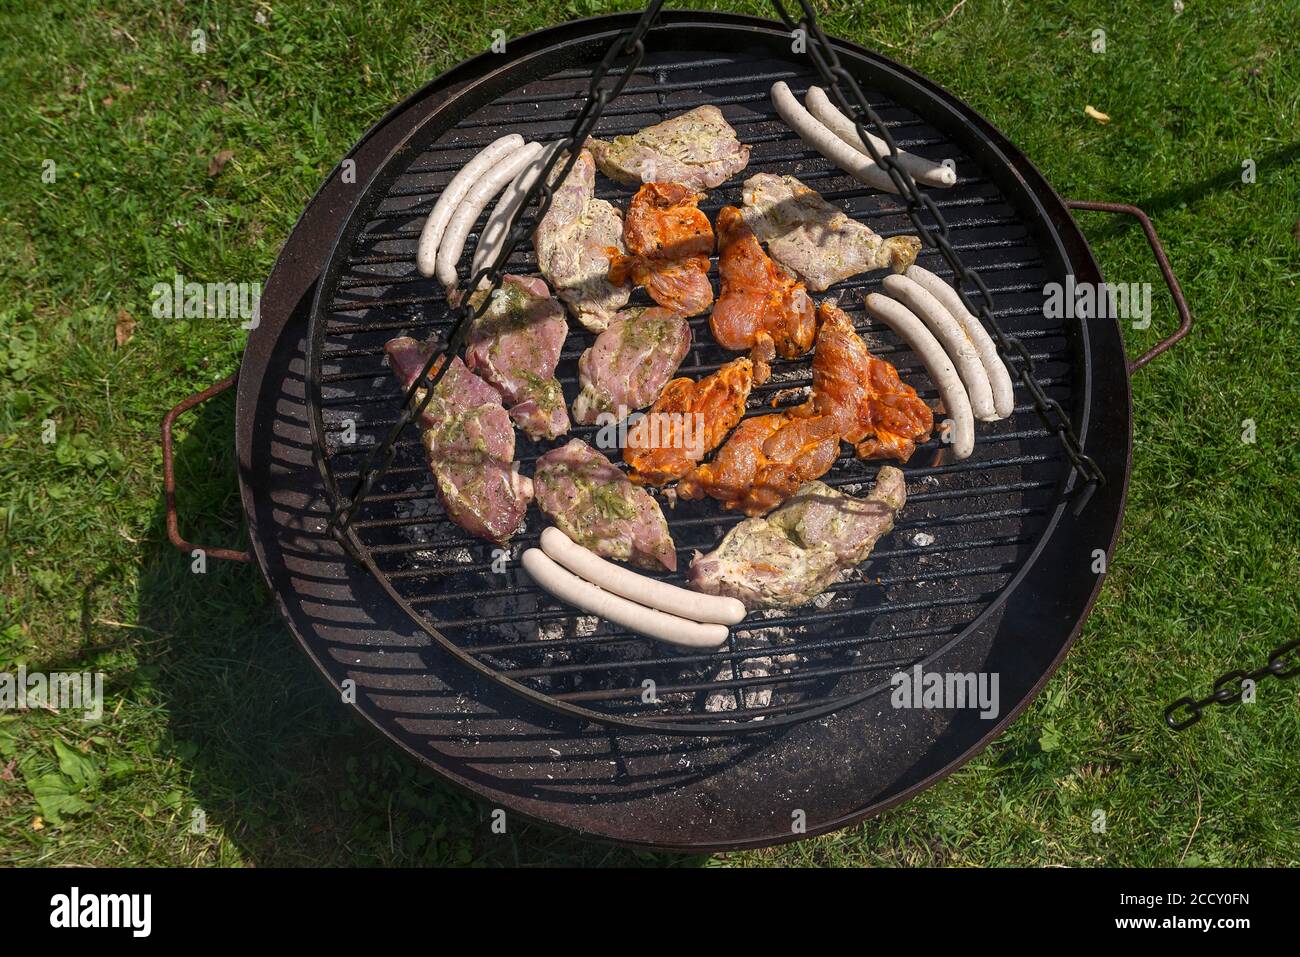 Barbecue food on a swivel grill, Mecklenburg-Western Pomerania, Germany Stock Photo